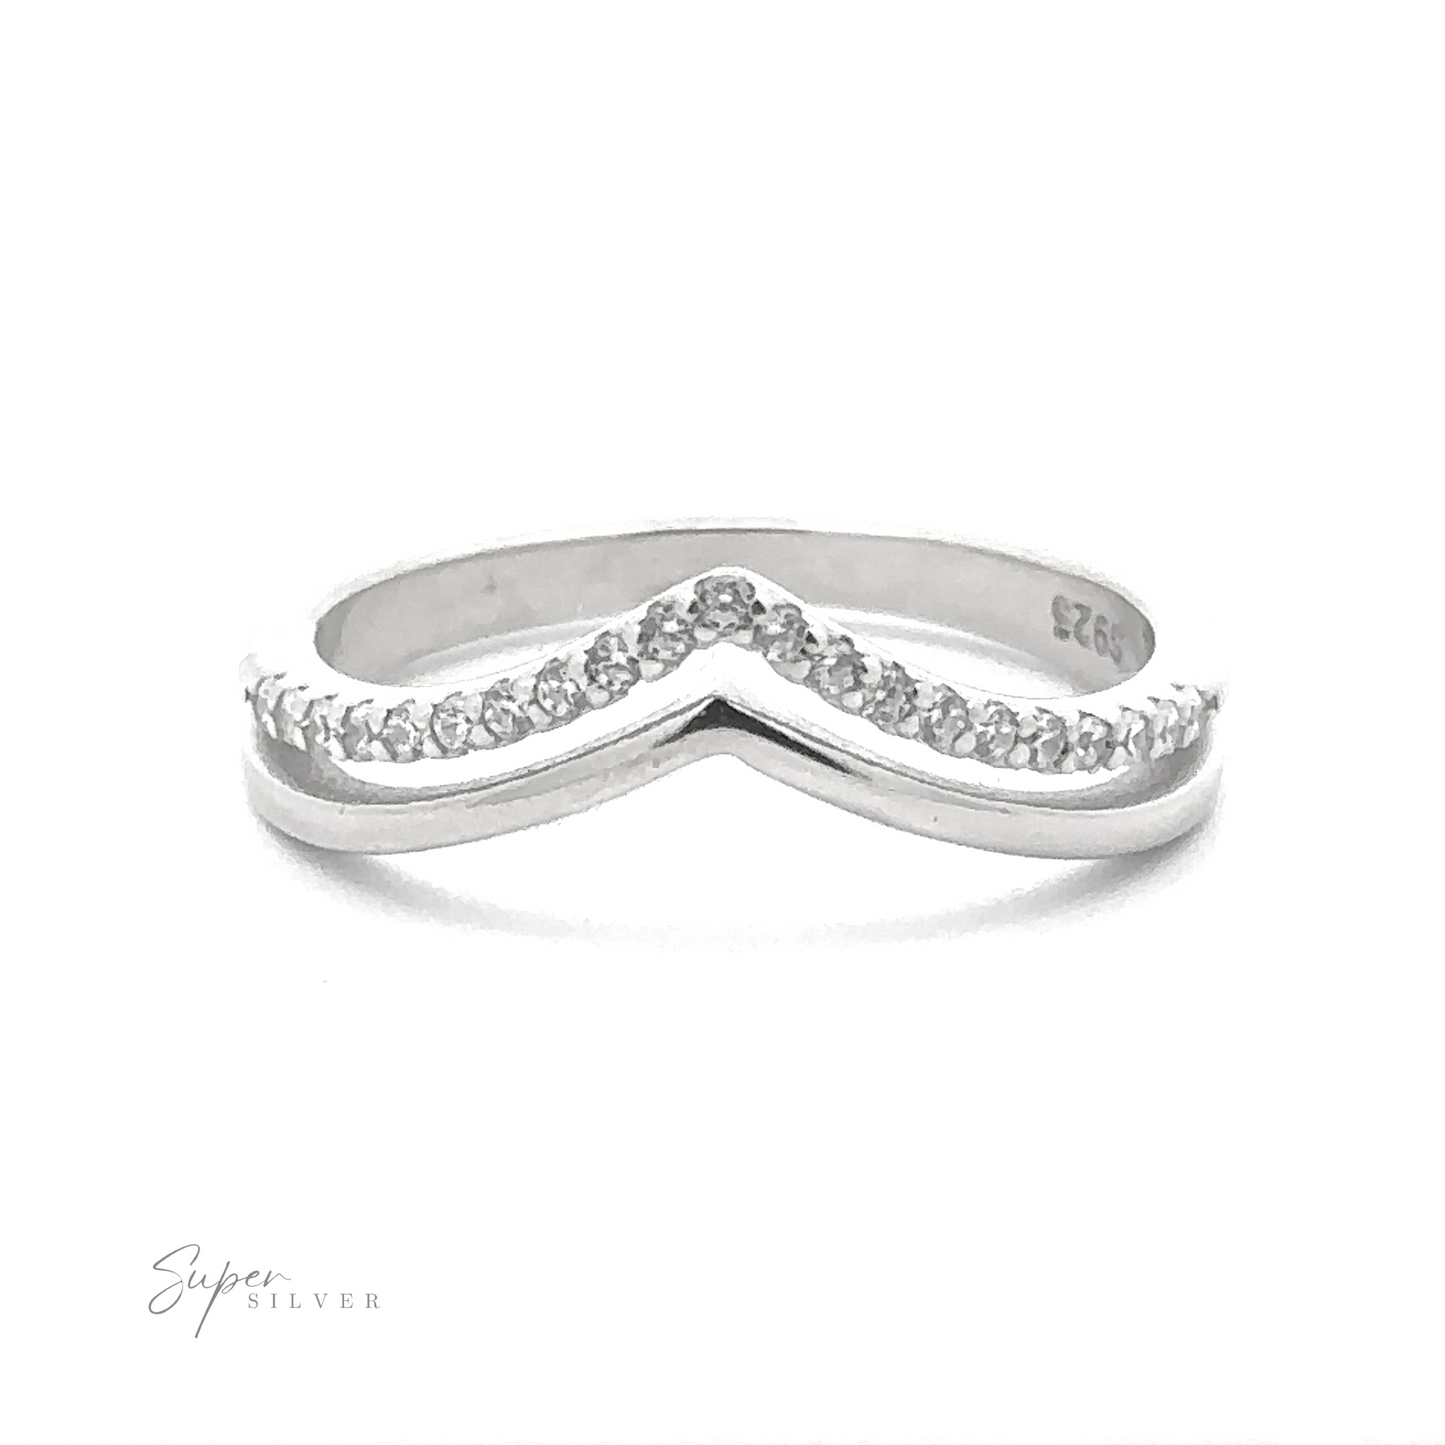 A Double Chevron Cubic Zirconia Ring with a modern double chevron design, adorned with small round-cut diamonds along the top edge. The ring is labeled "Super Silver" in the bottom left corner.